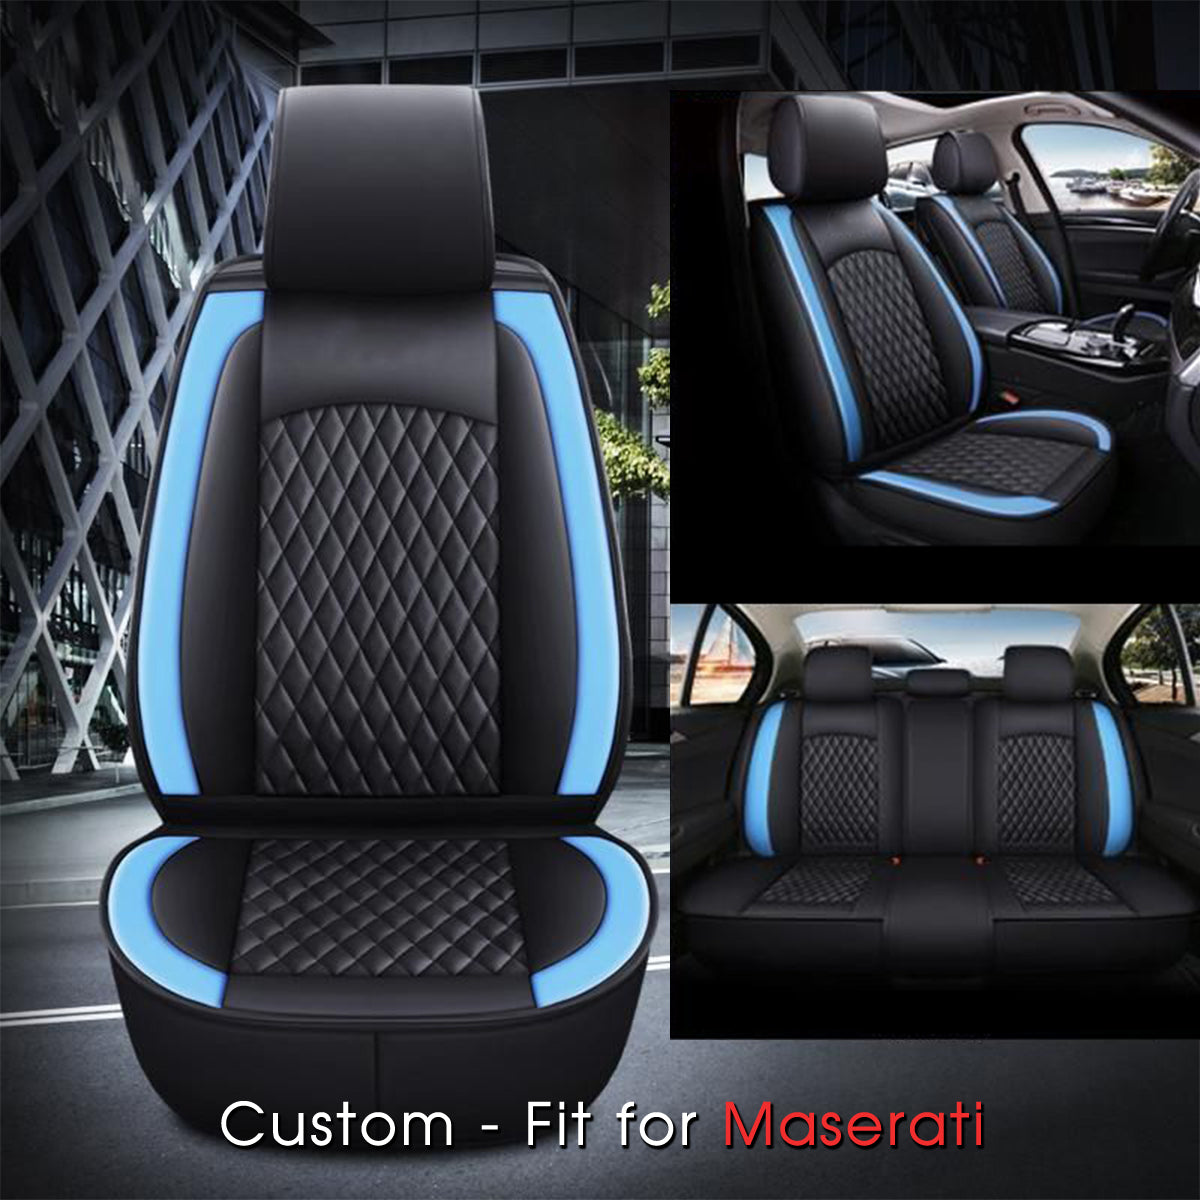 2 Car Seat Covers Full Set, Custom-Fit For Car, Waterproof Leather Front Rear Seat Automotive Protection Cushions, Car Accessories DLMS211